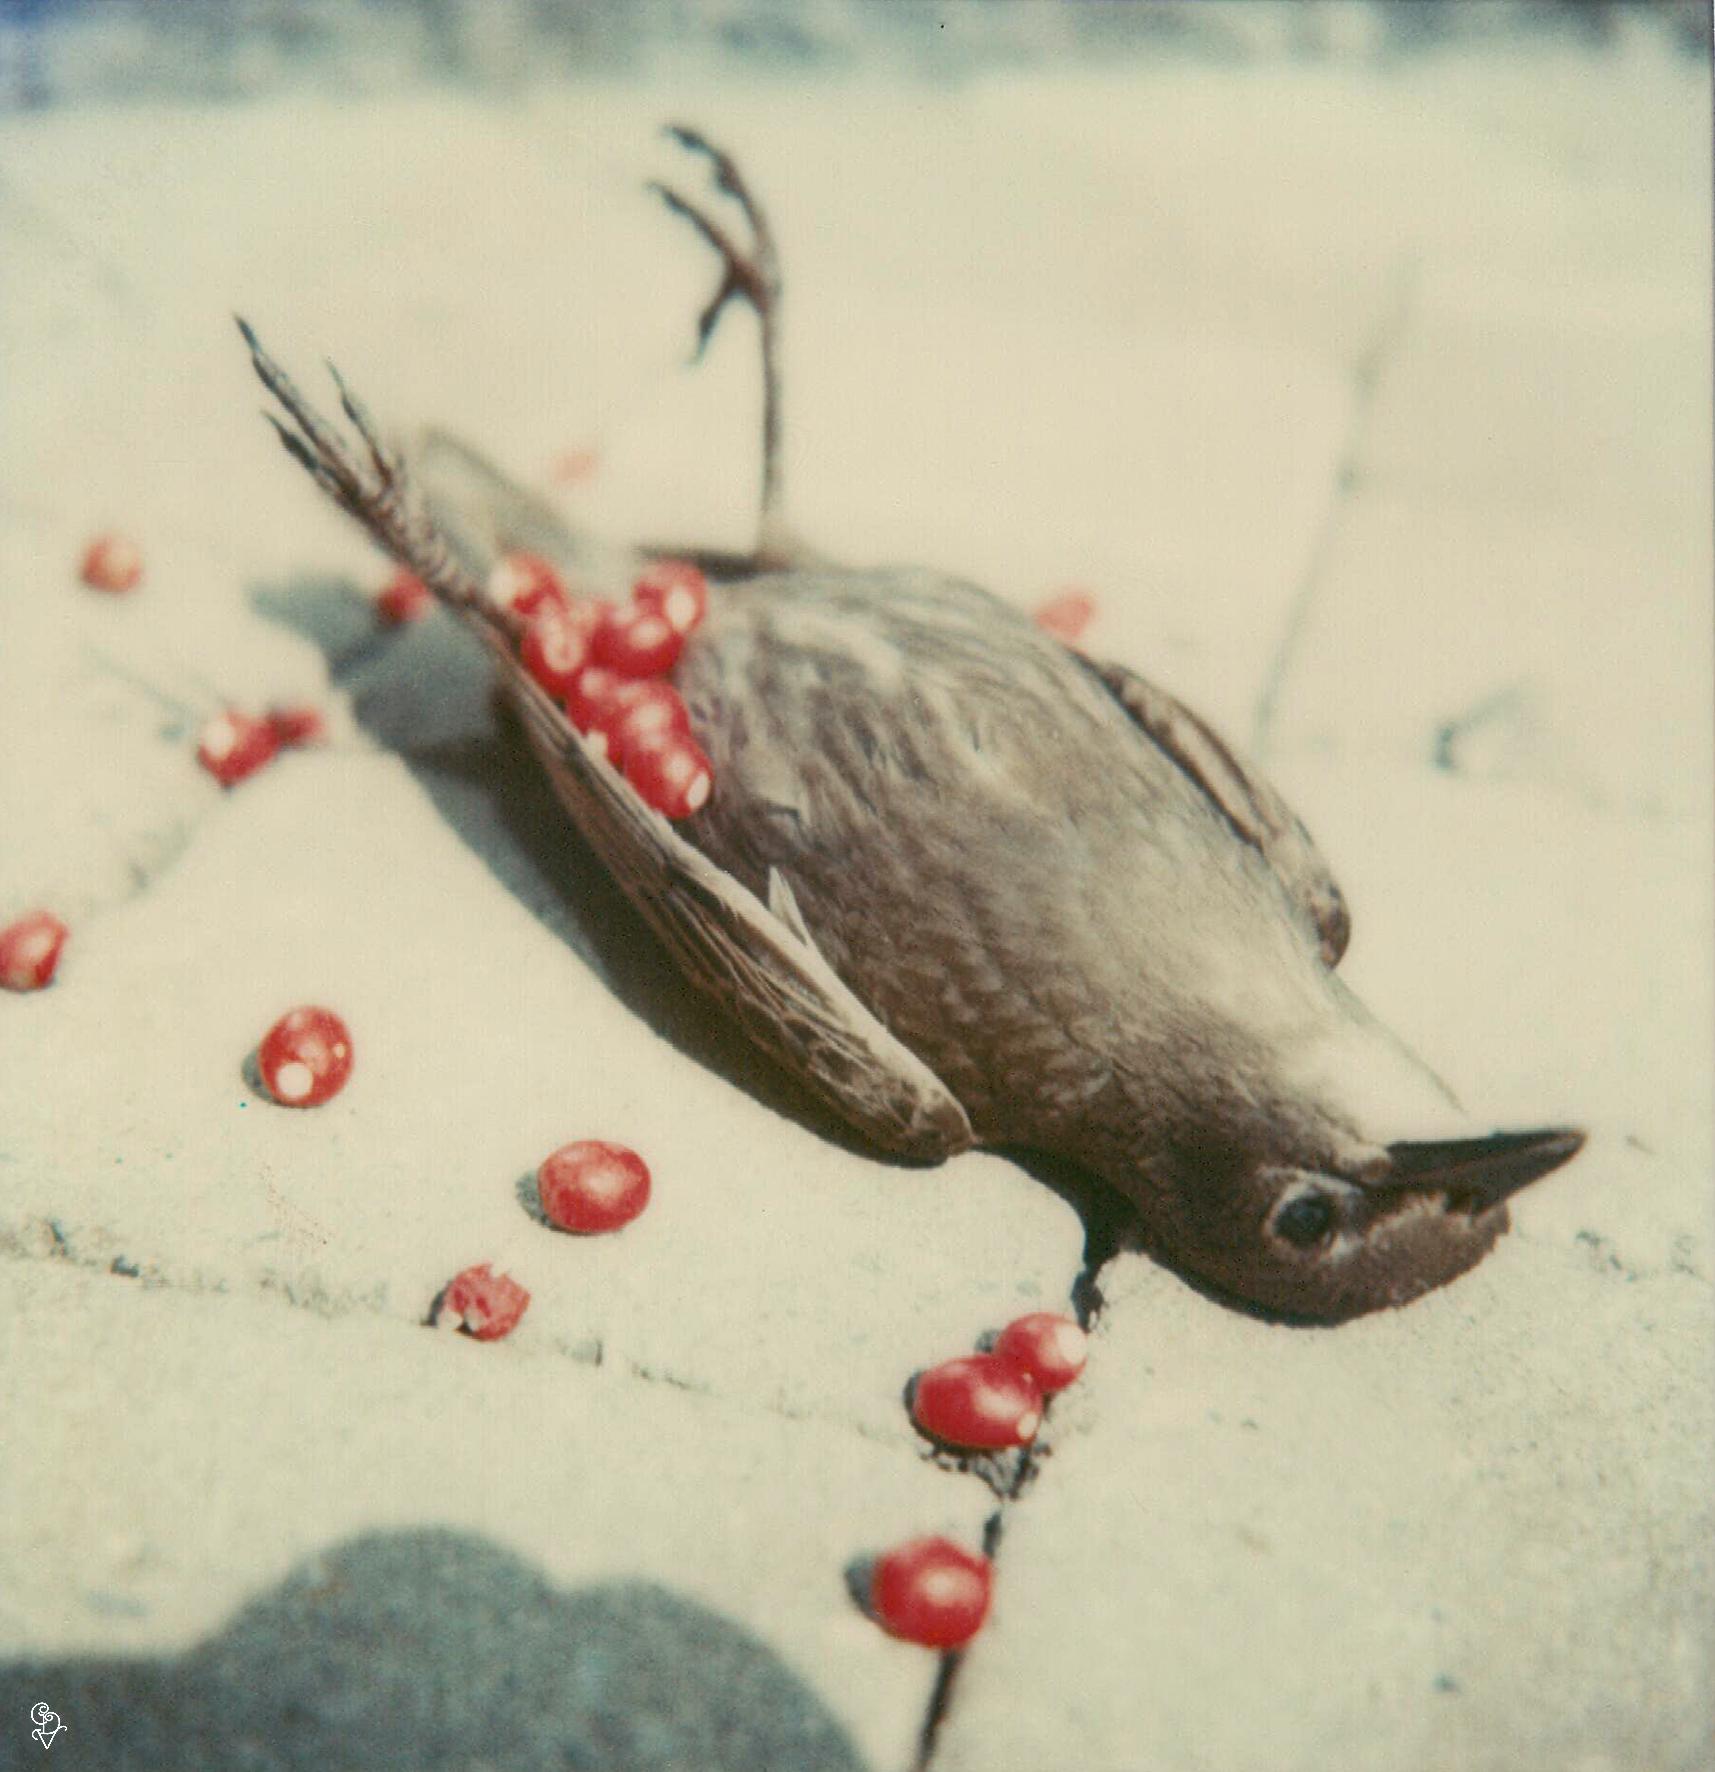 Carmen de Vos Figurative Photograph - The Hunter 01 [From the series Wild Things] - Polaroid, Contemporary, Color